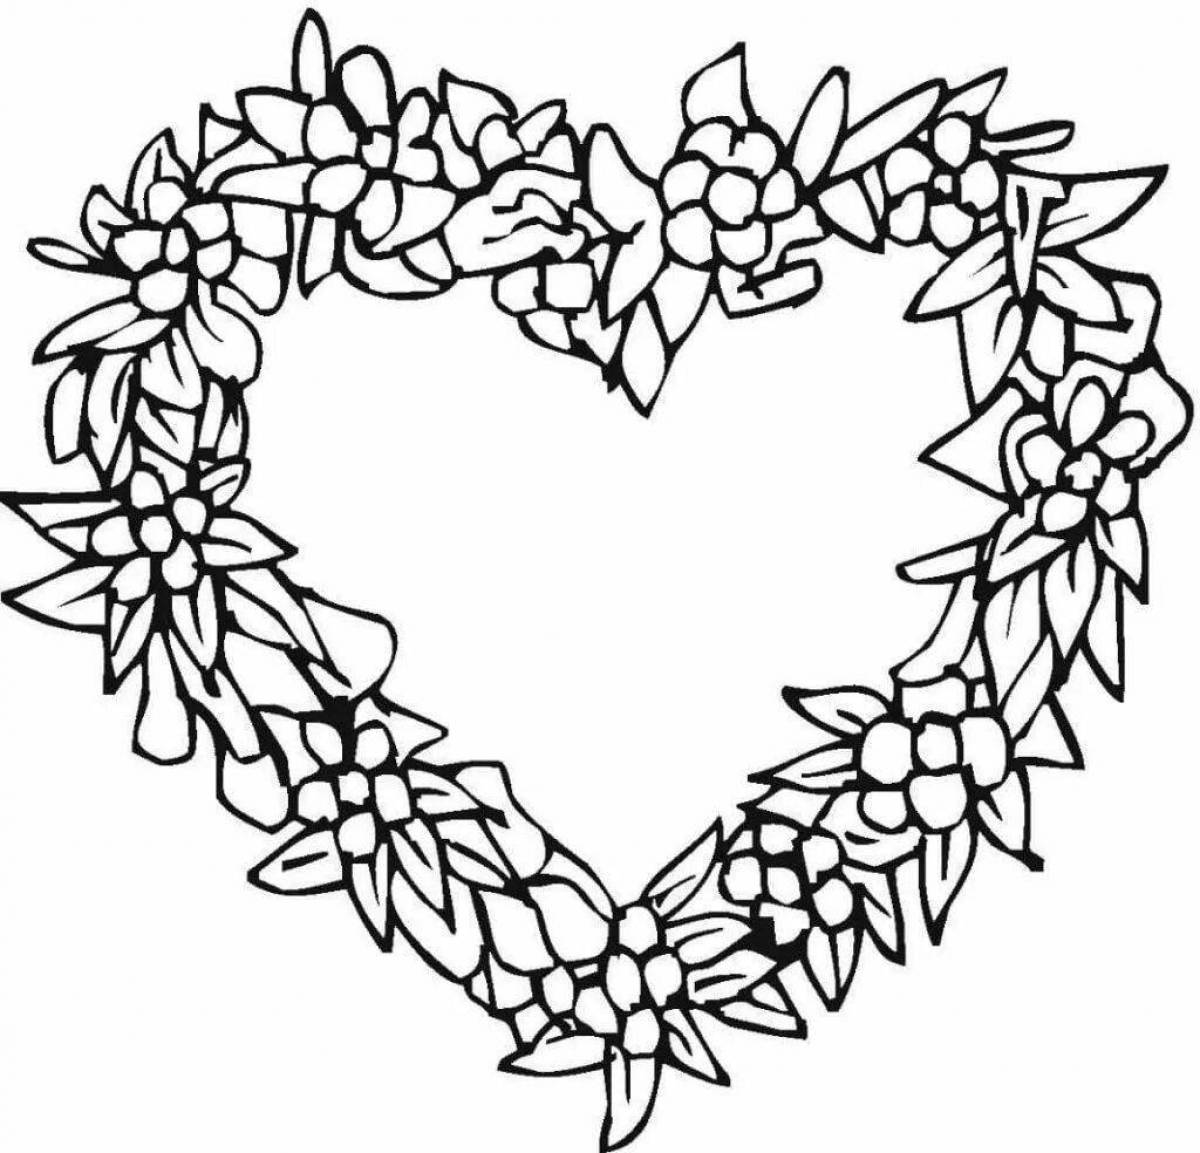 Glowing flower wreath coloring page